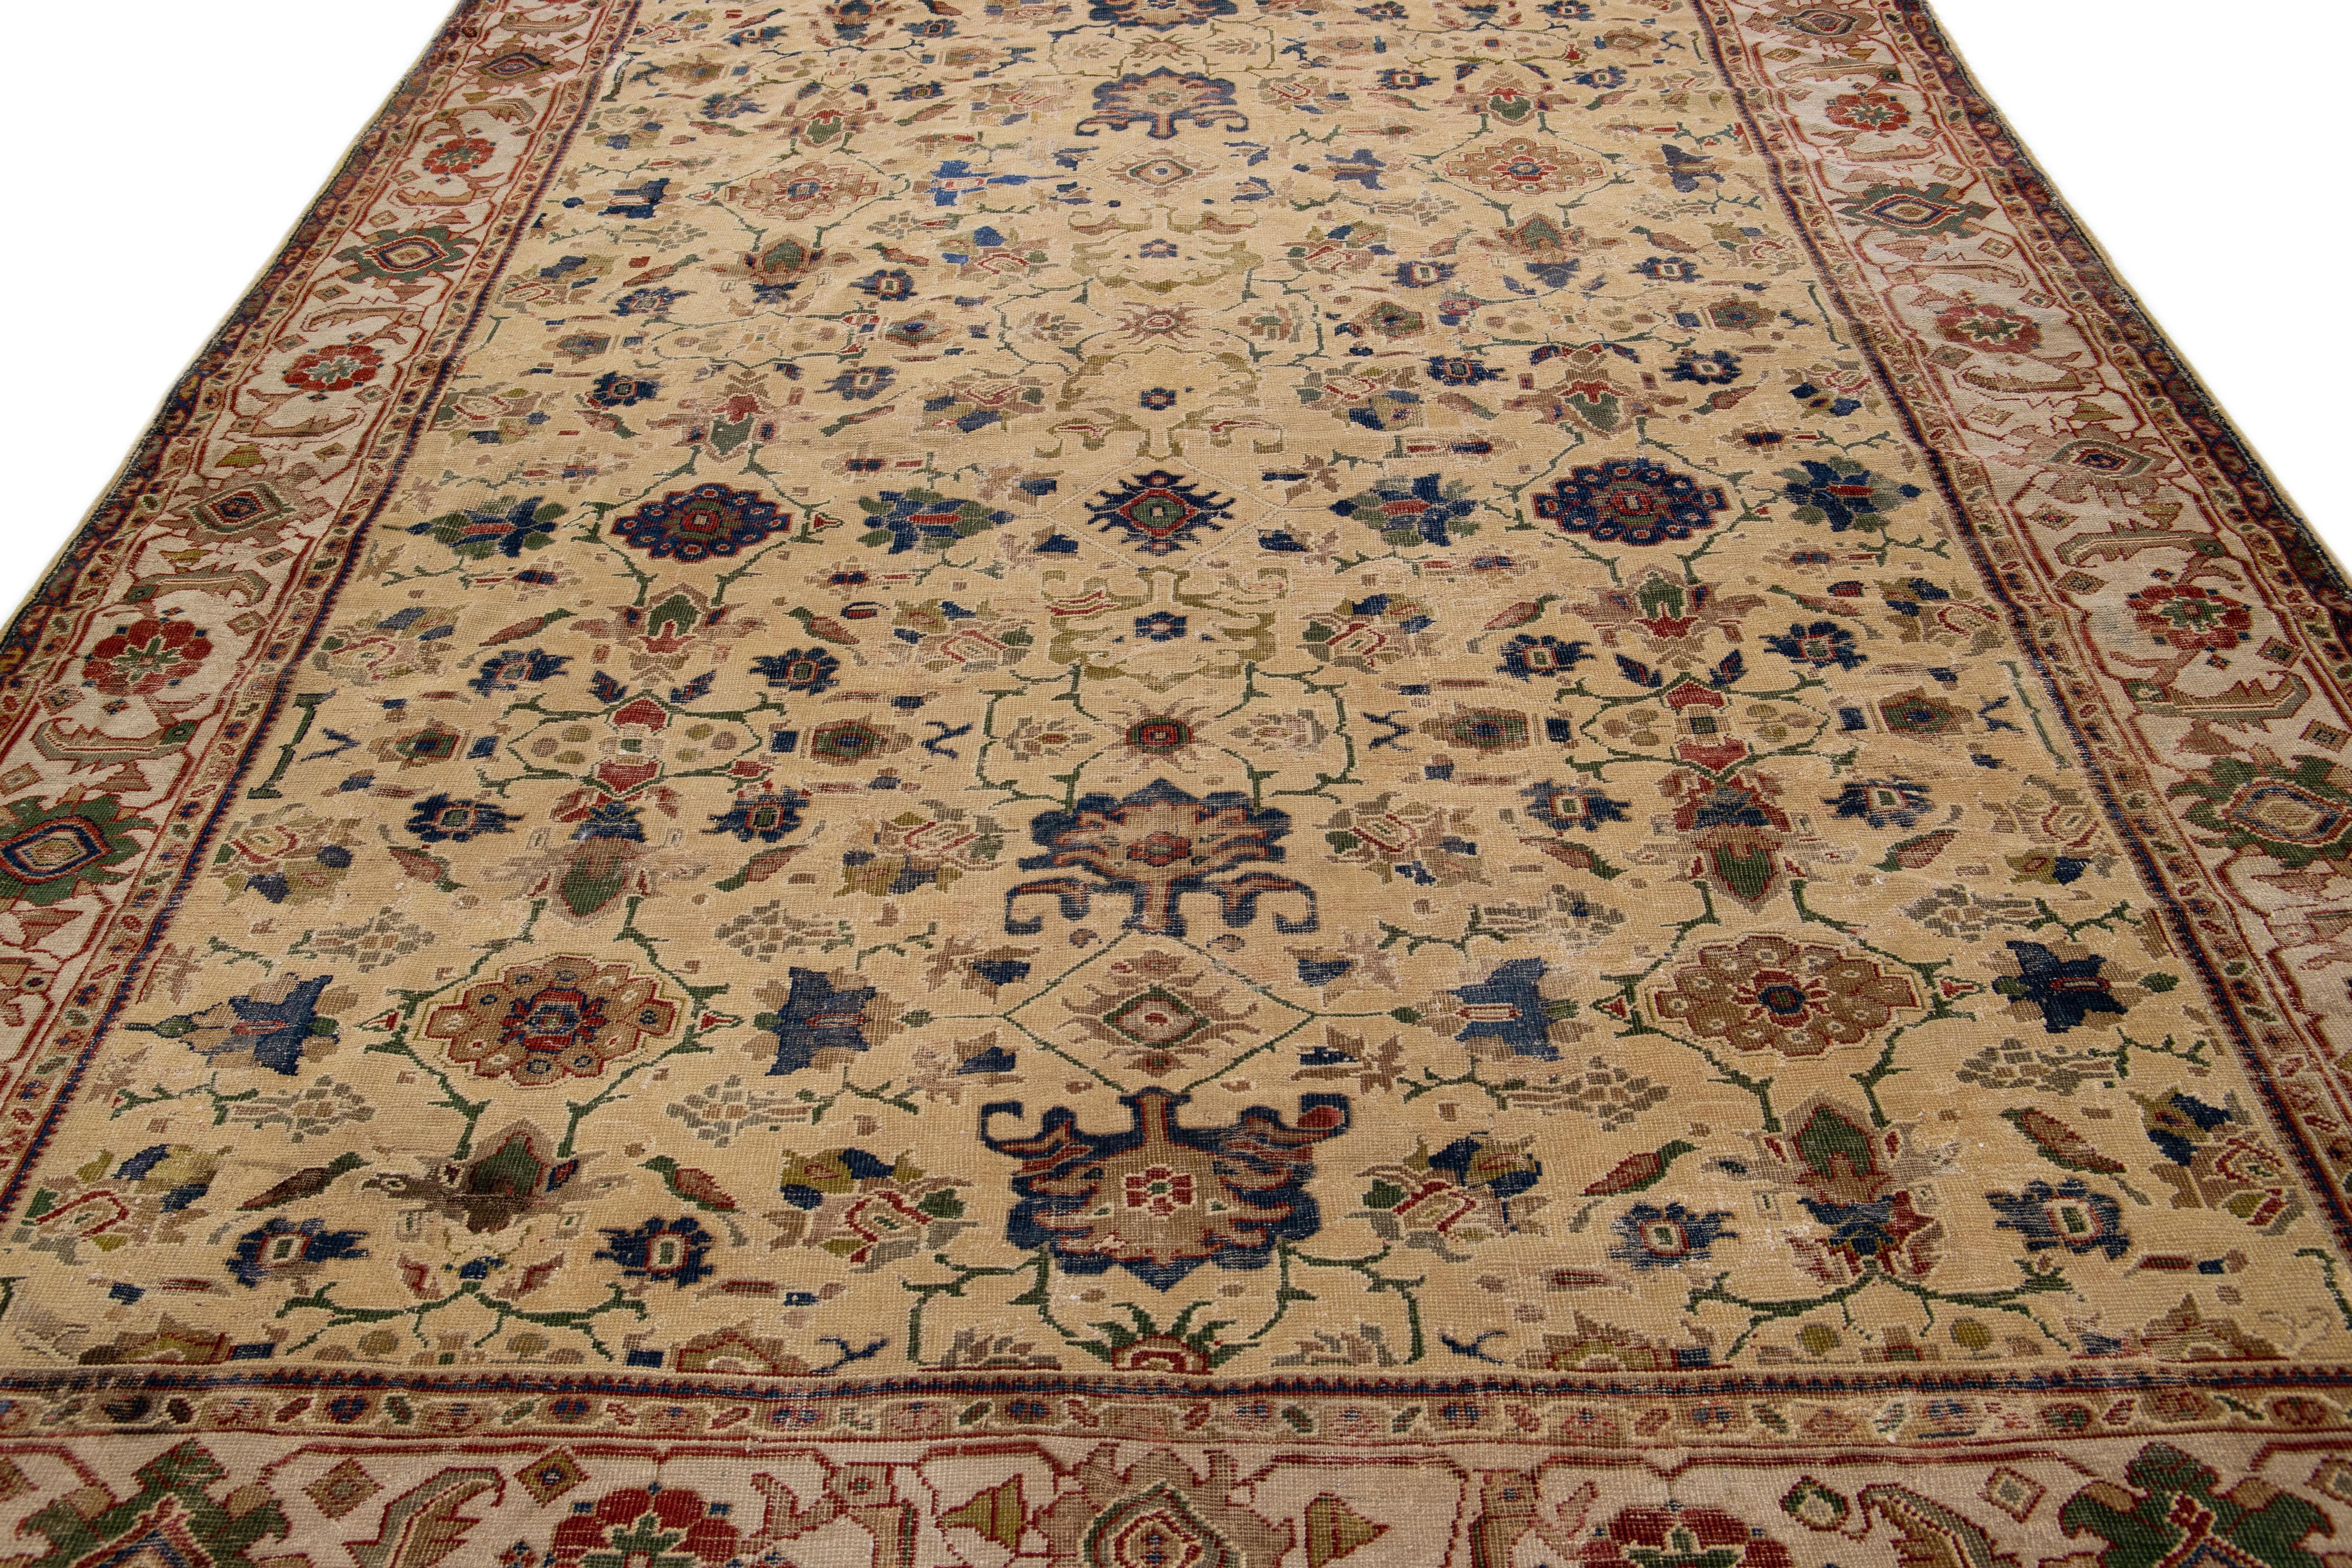 Beautiful antique Persian Sultanabad hand-knotted wool rug with a tan field. This piece has a beige-designed frame with red, blue, and green accents in a gorgeous all-over floral design.

This rug measures: 8'3